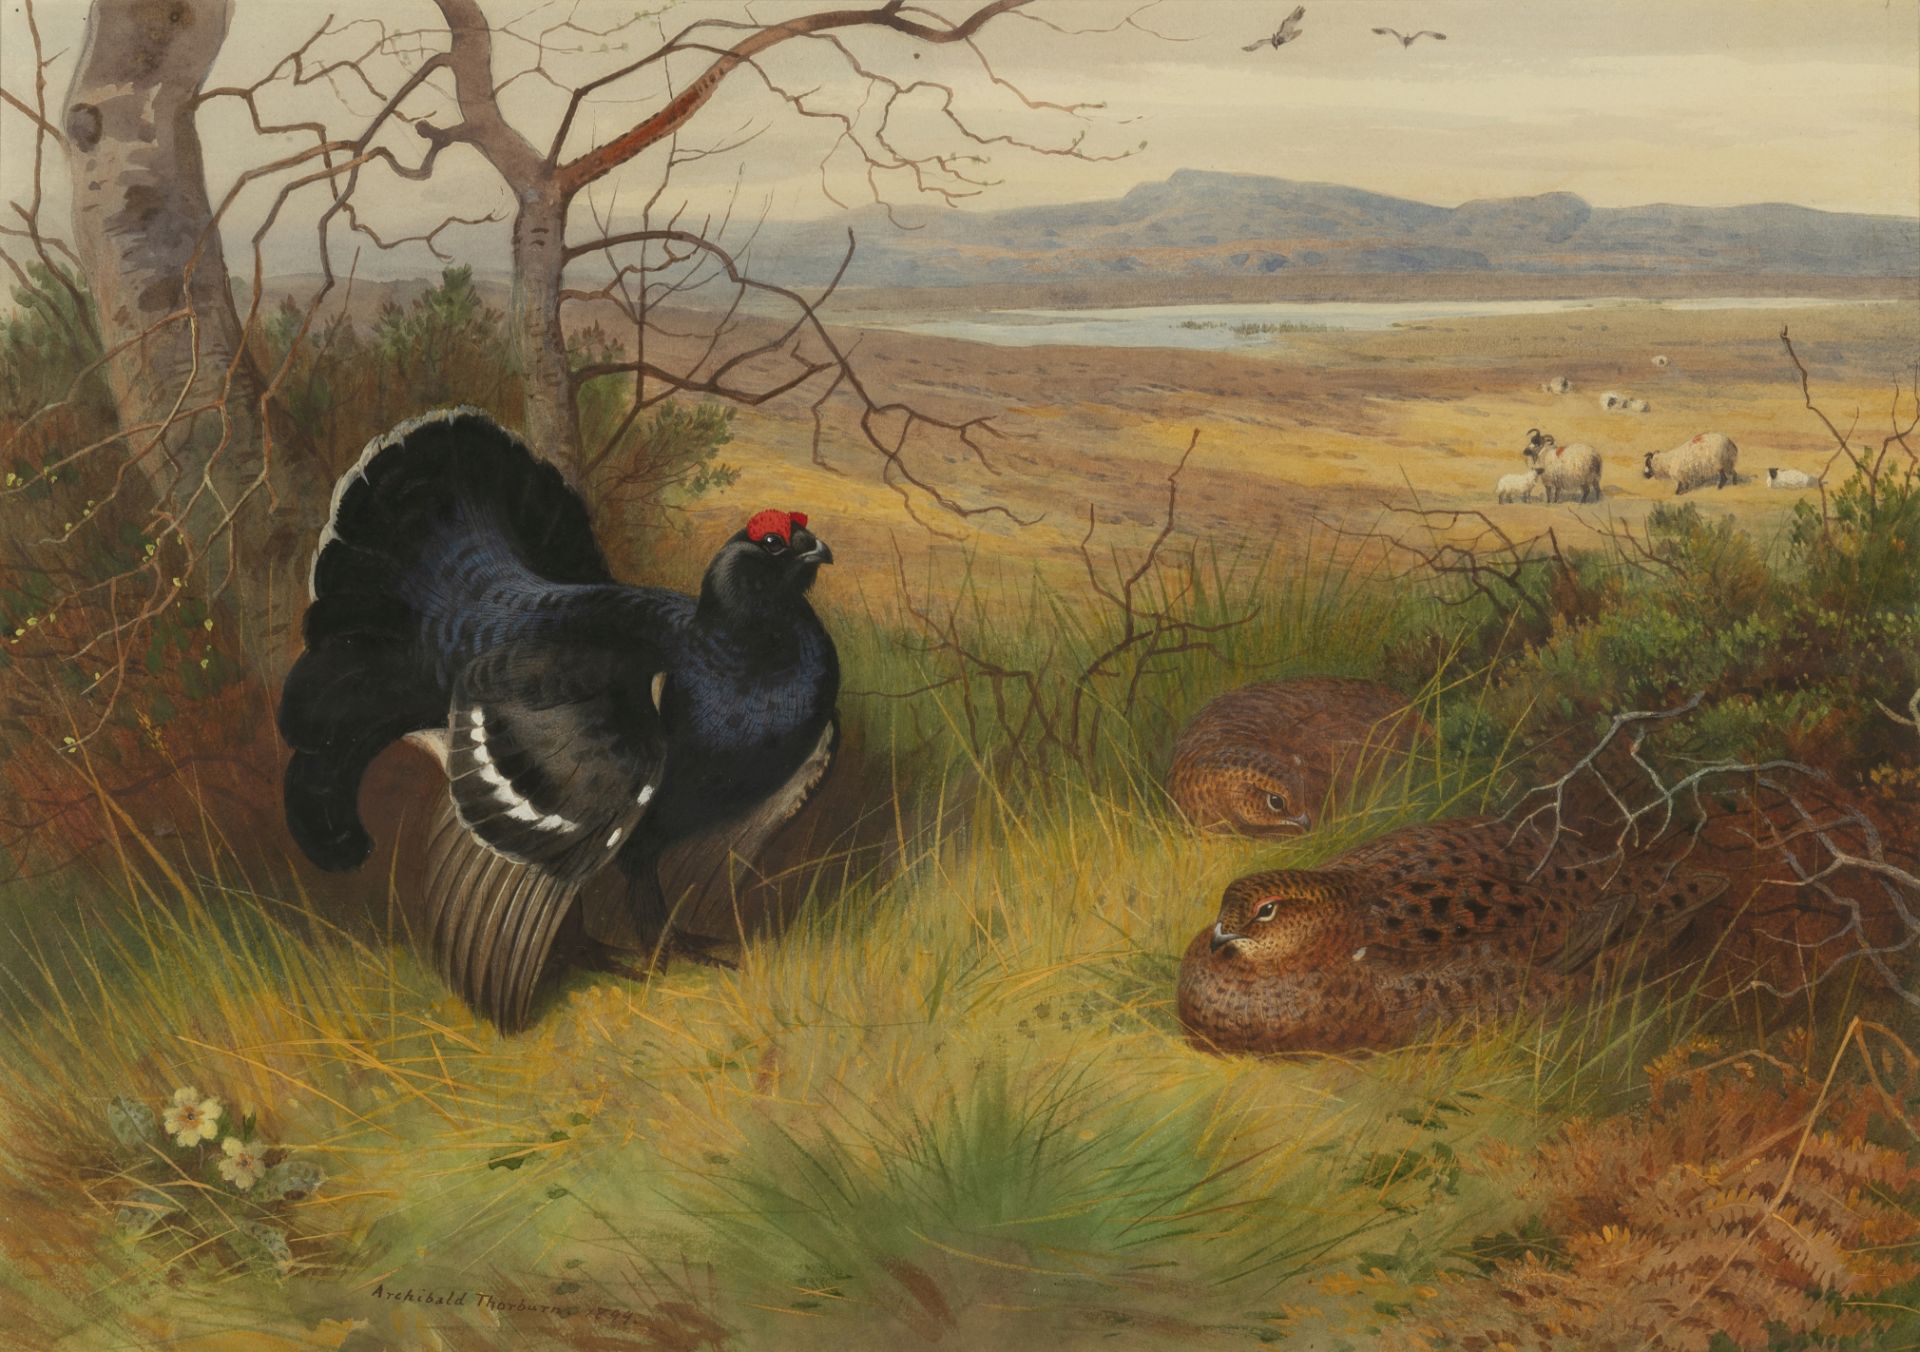 Archibald Thorburn (British, 1860-1935) Blackcock and two hens in a highland landscape